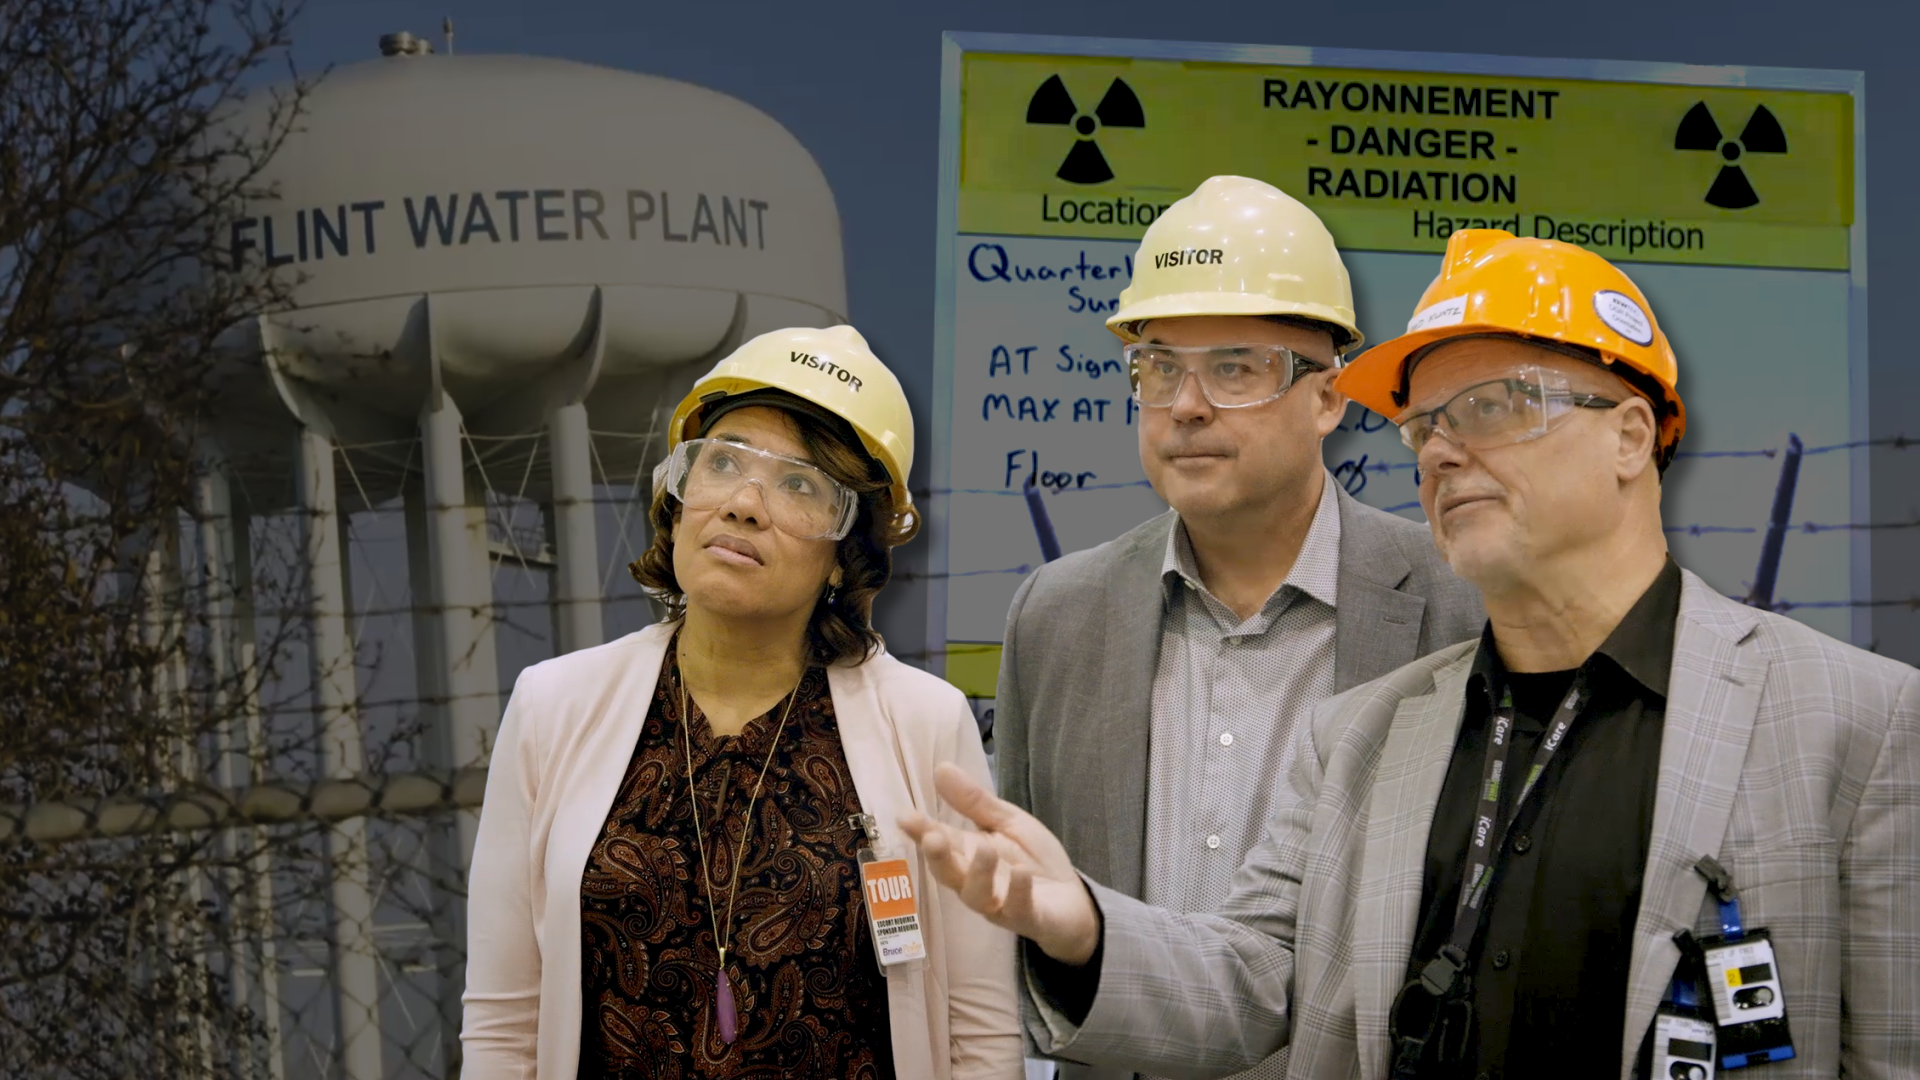 Three peopel in hardhats in front of a collage background of a water tower and a sign that warns of radiation